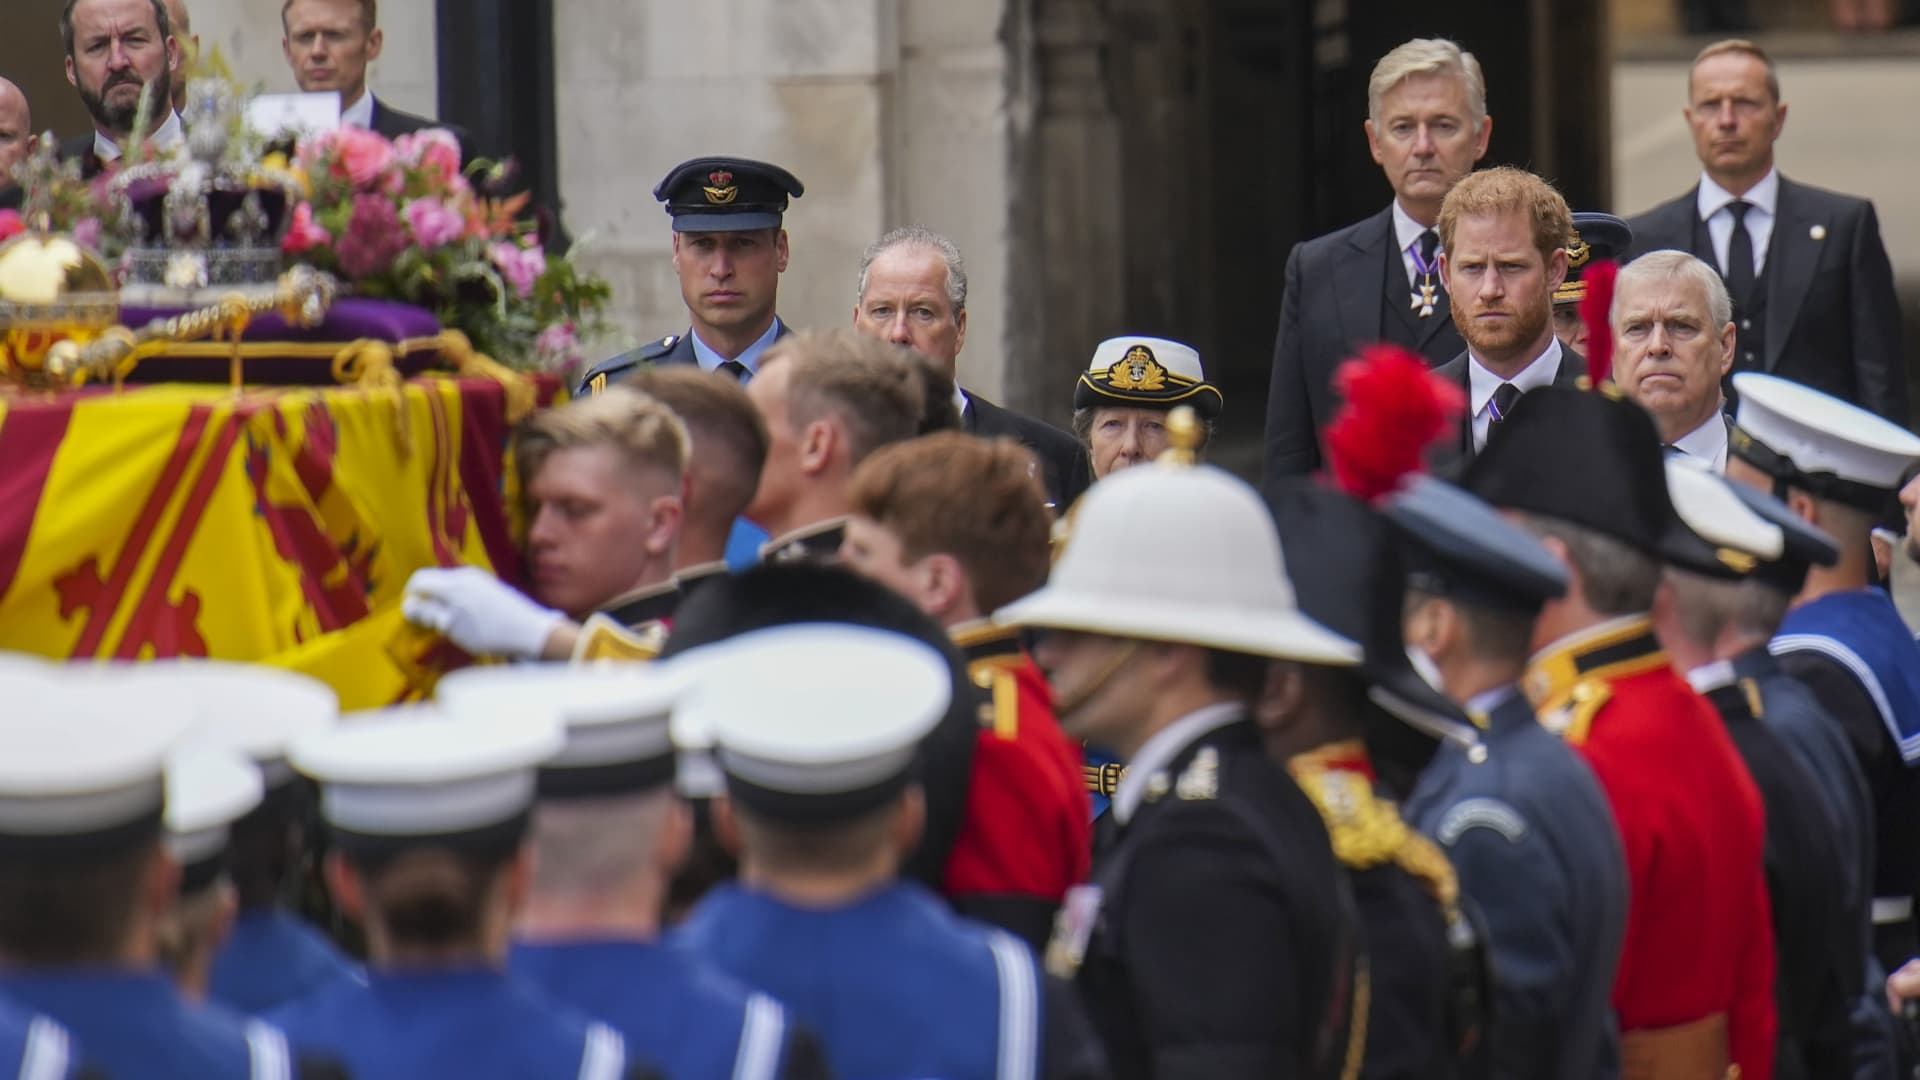 The world's most powerful are gathered in London for Queen Elizabeth II's funeral. Here's who is — and isn't — there